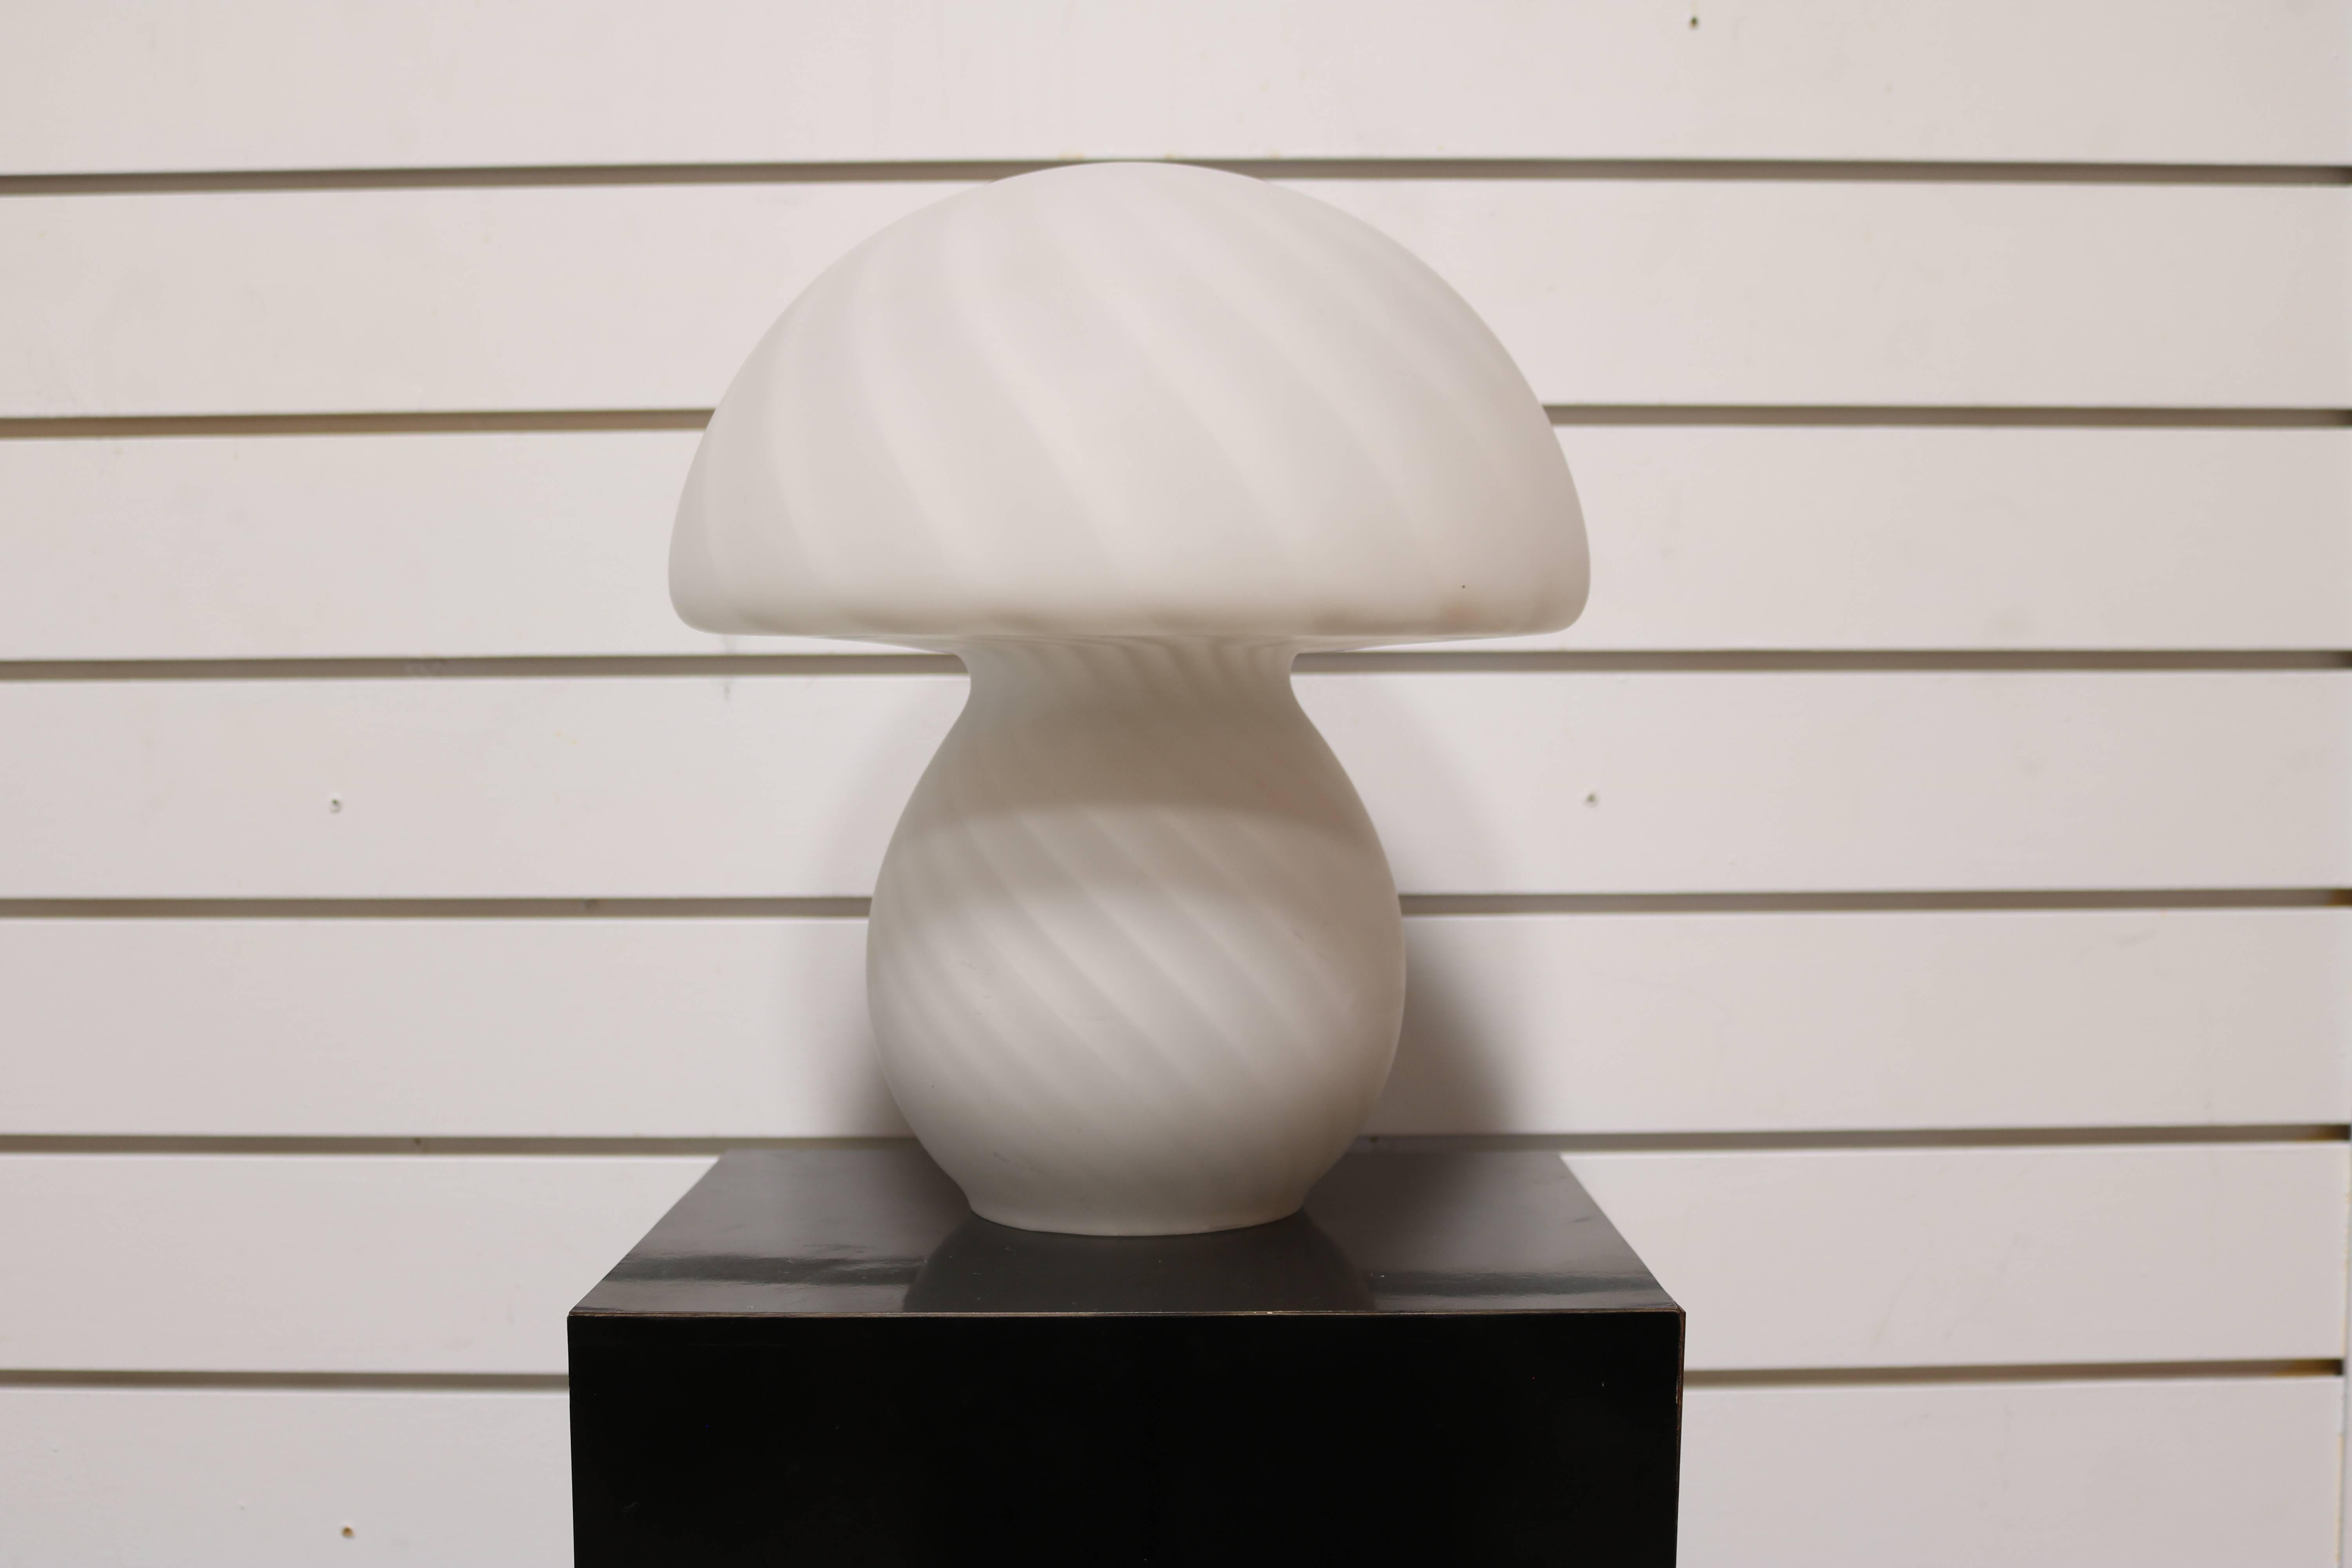 This lamp is white with a swirl pattern.